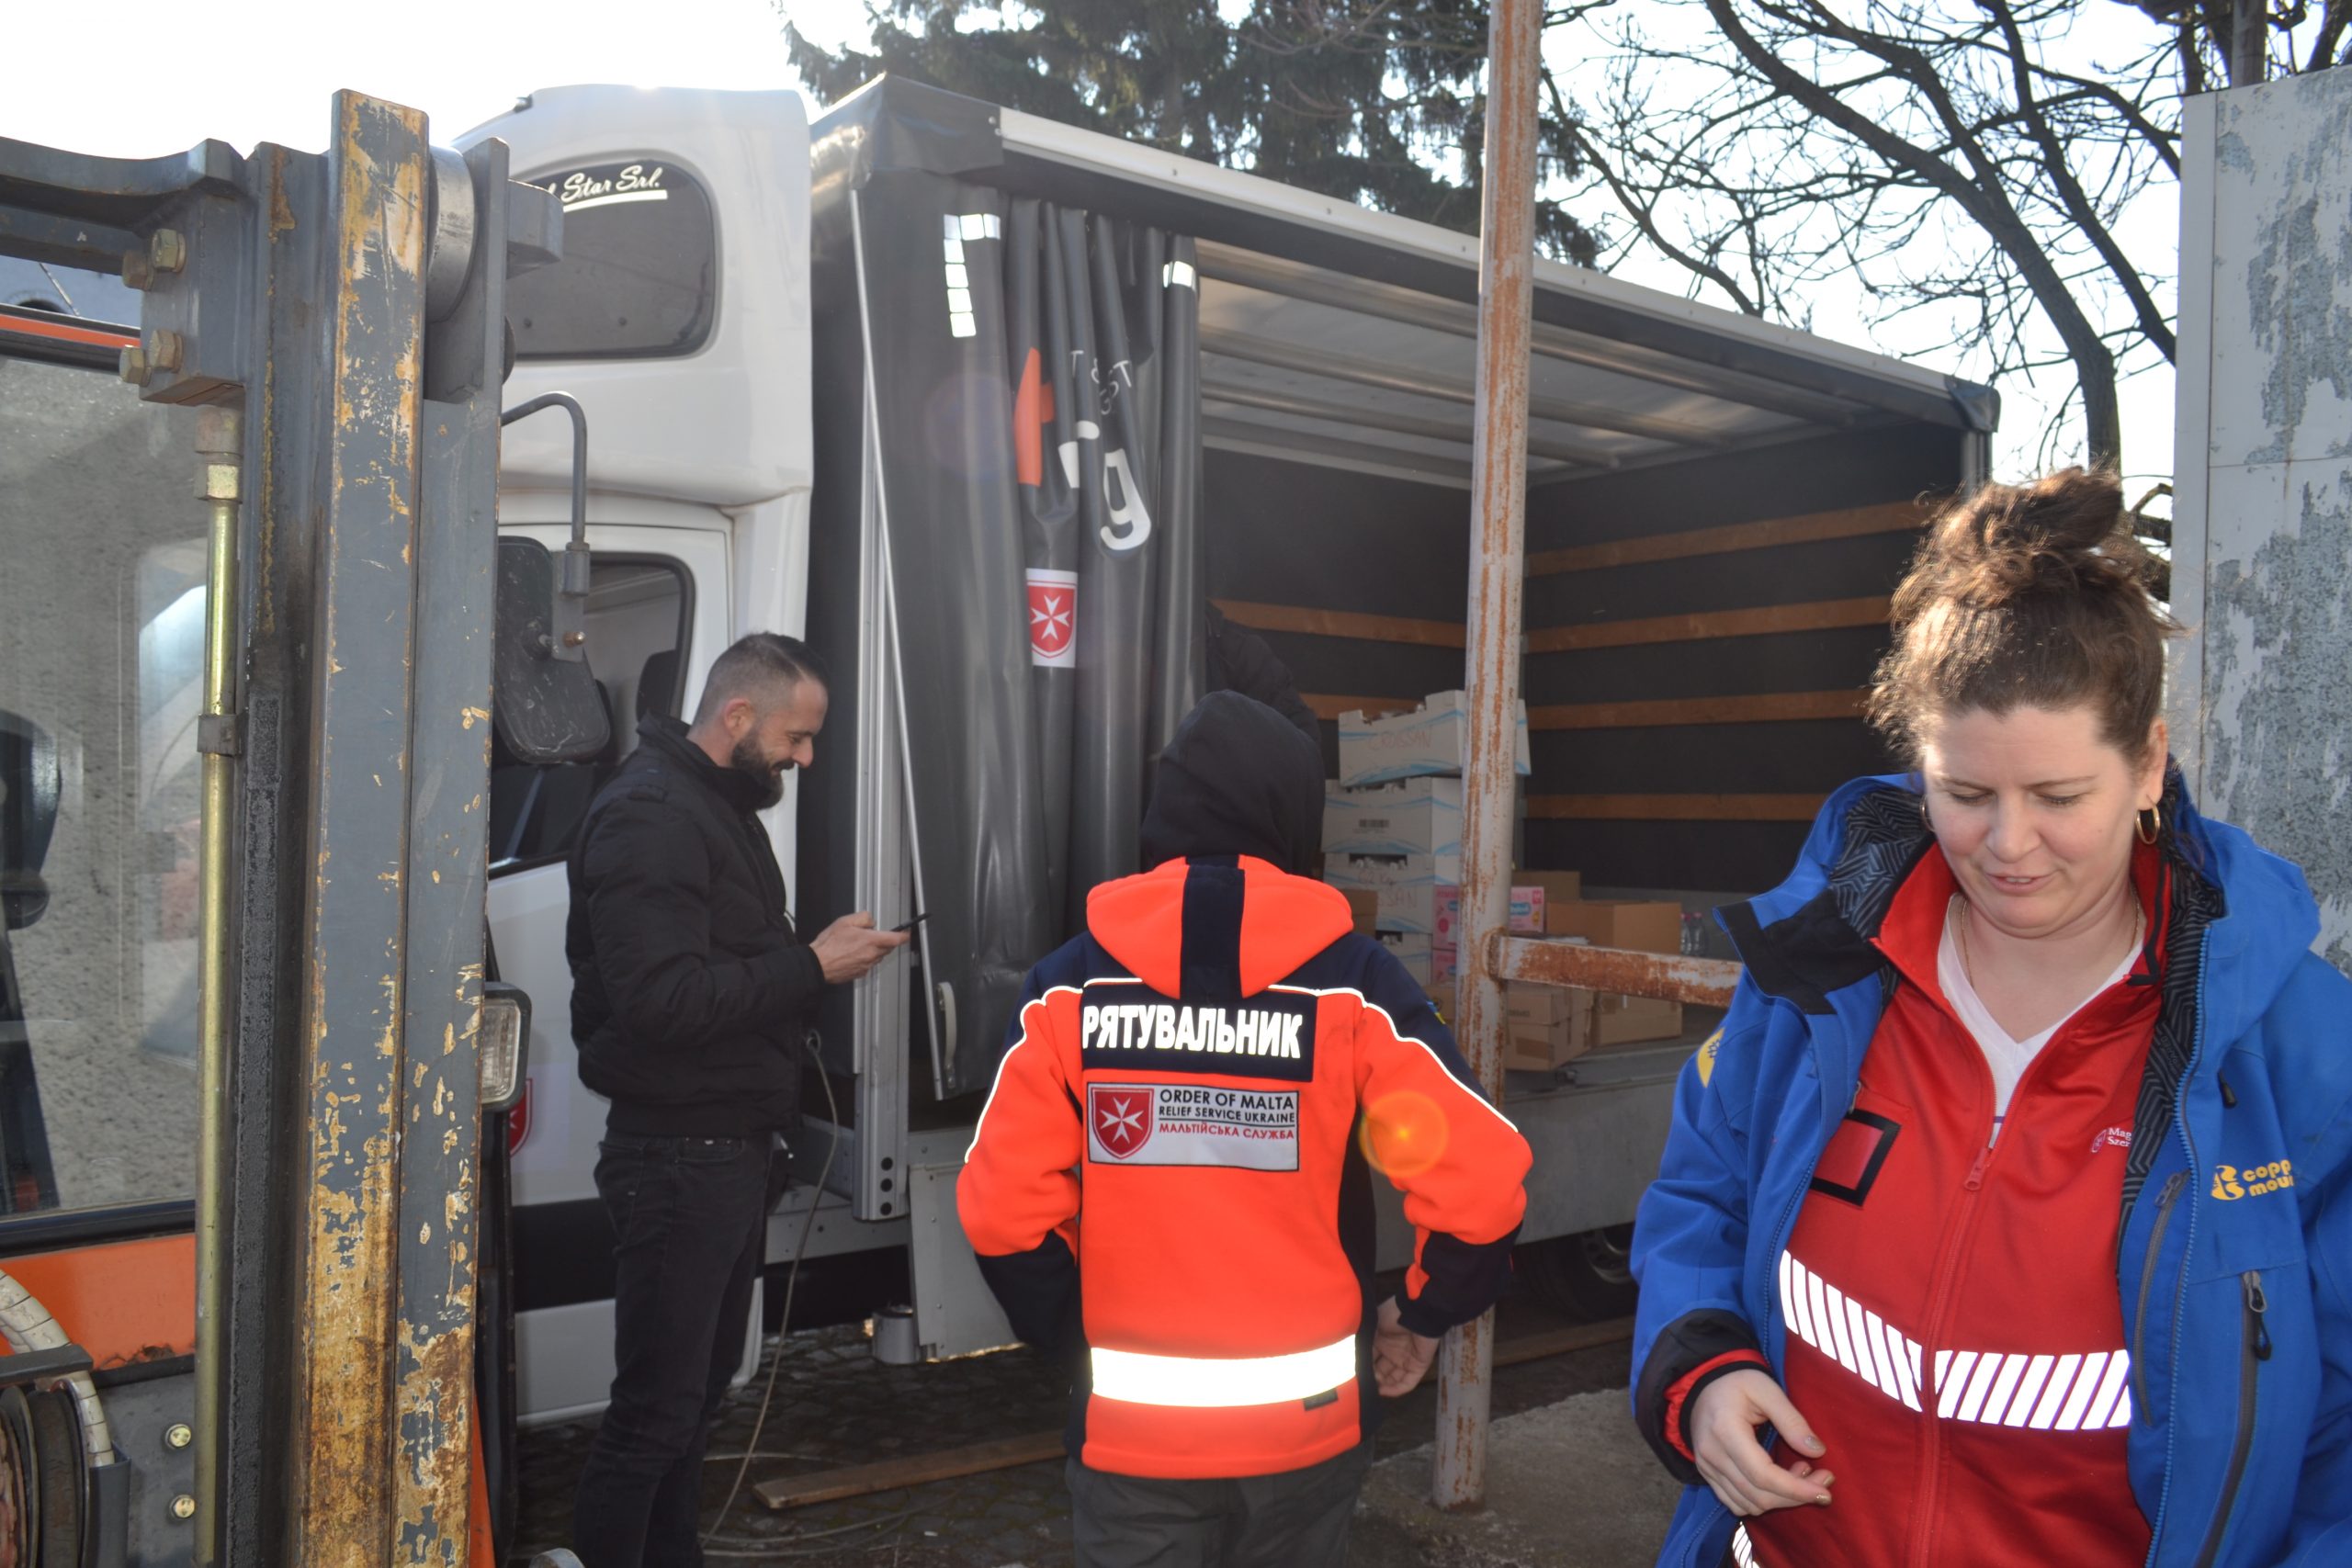 Order of Malta working hard to bring relief to the Ukrainian refugees at the border and in the Transcarpathia region